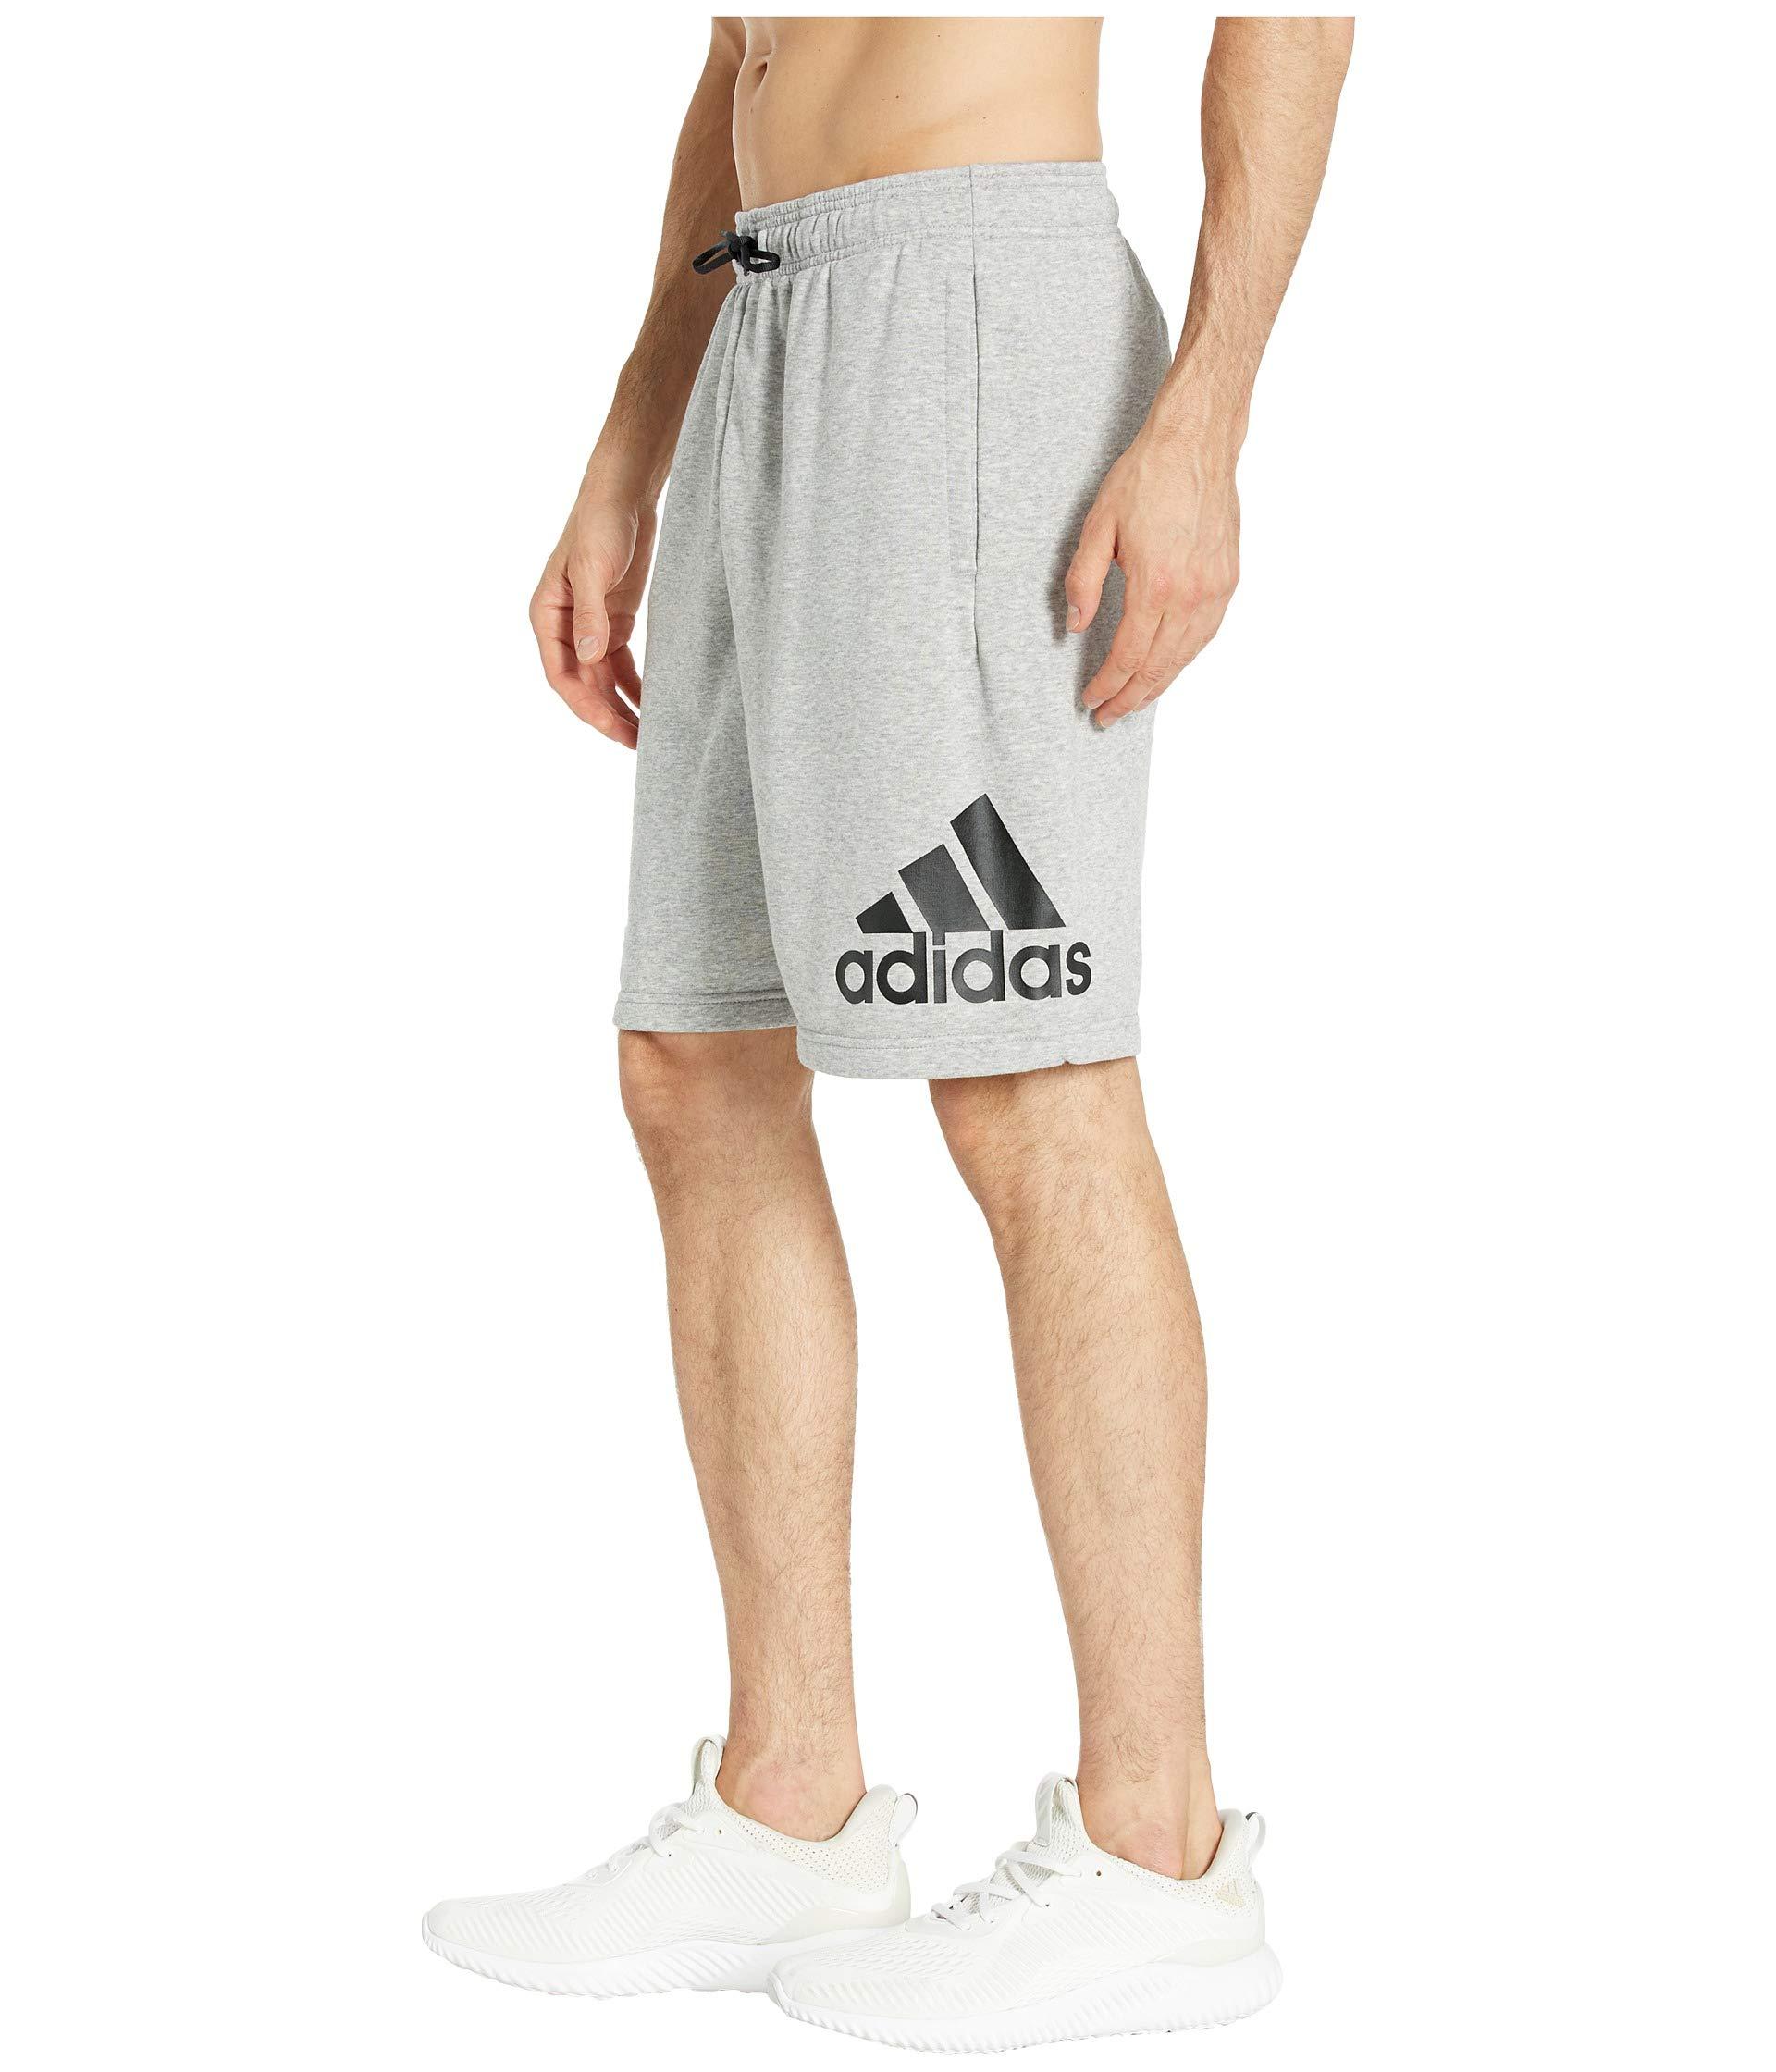 adidas Cotton Must Have French Terry Shorts in Gray for Men - Lyst